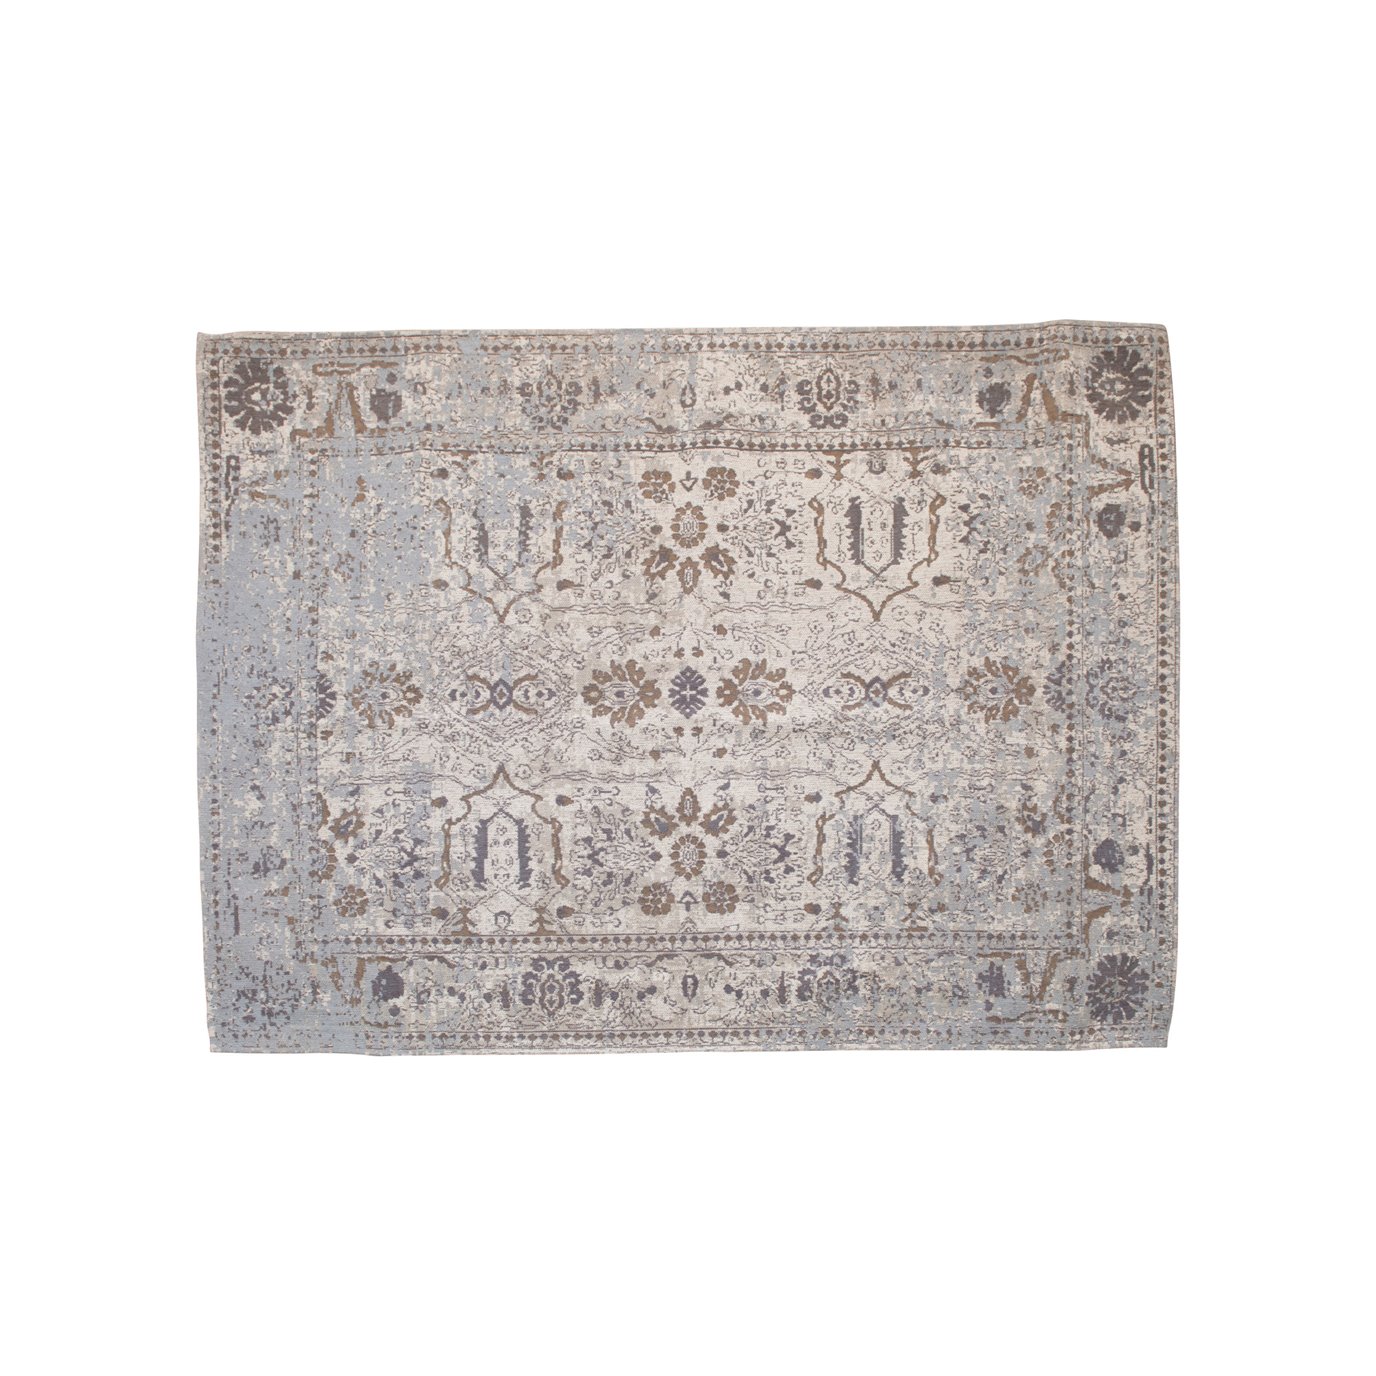 Distressed Finish Woven Cotton Printed Rug